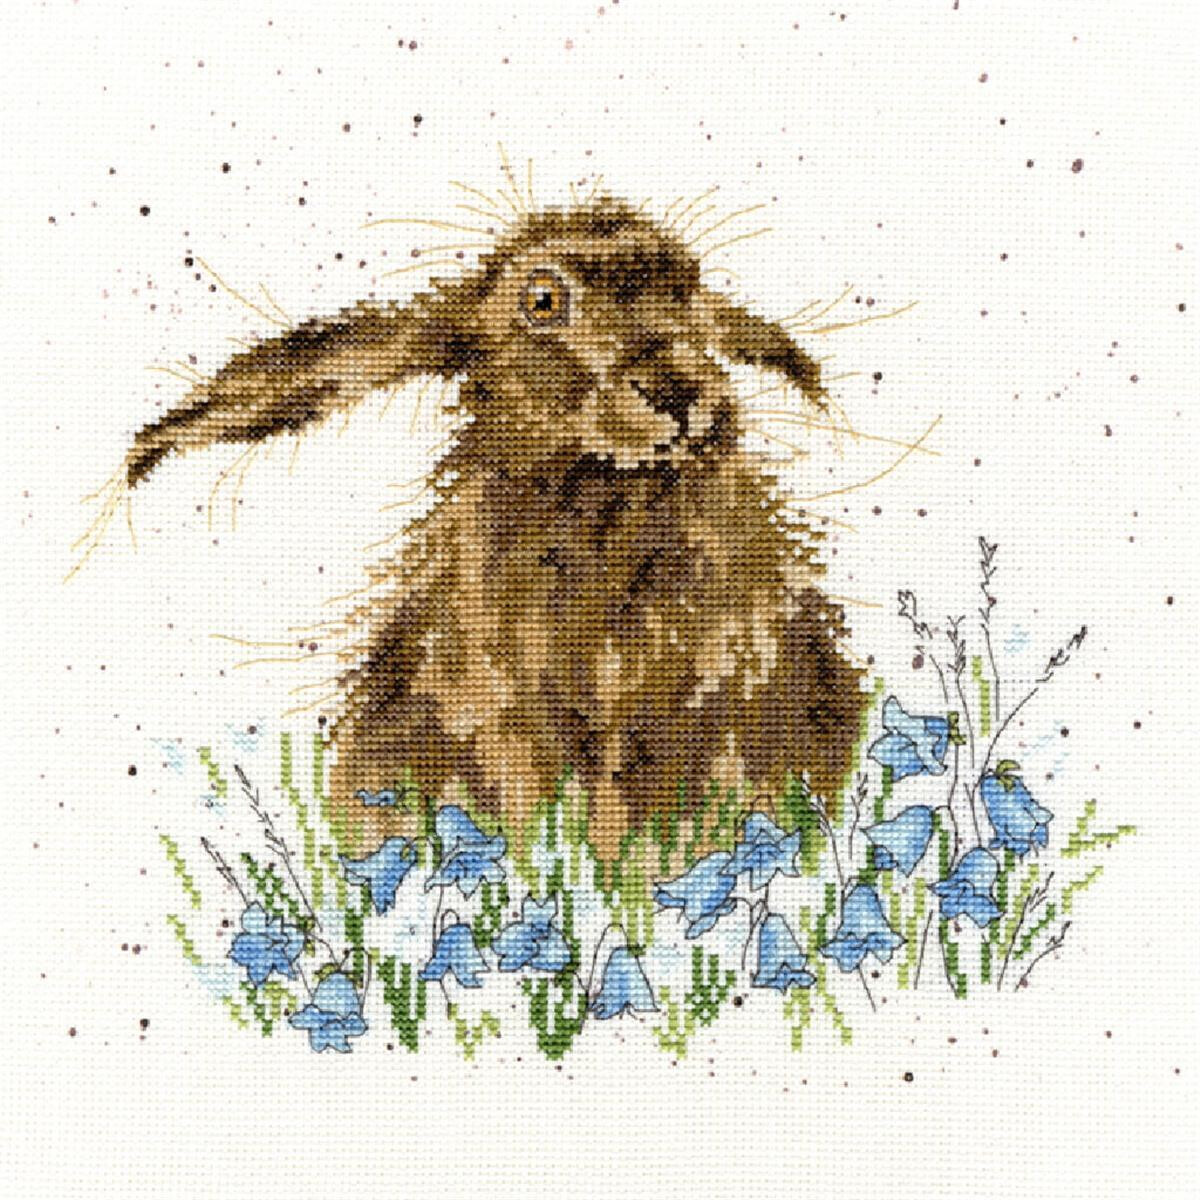 Detailed cross stitch of a brown rabbit with long ears...